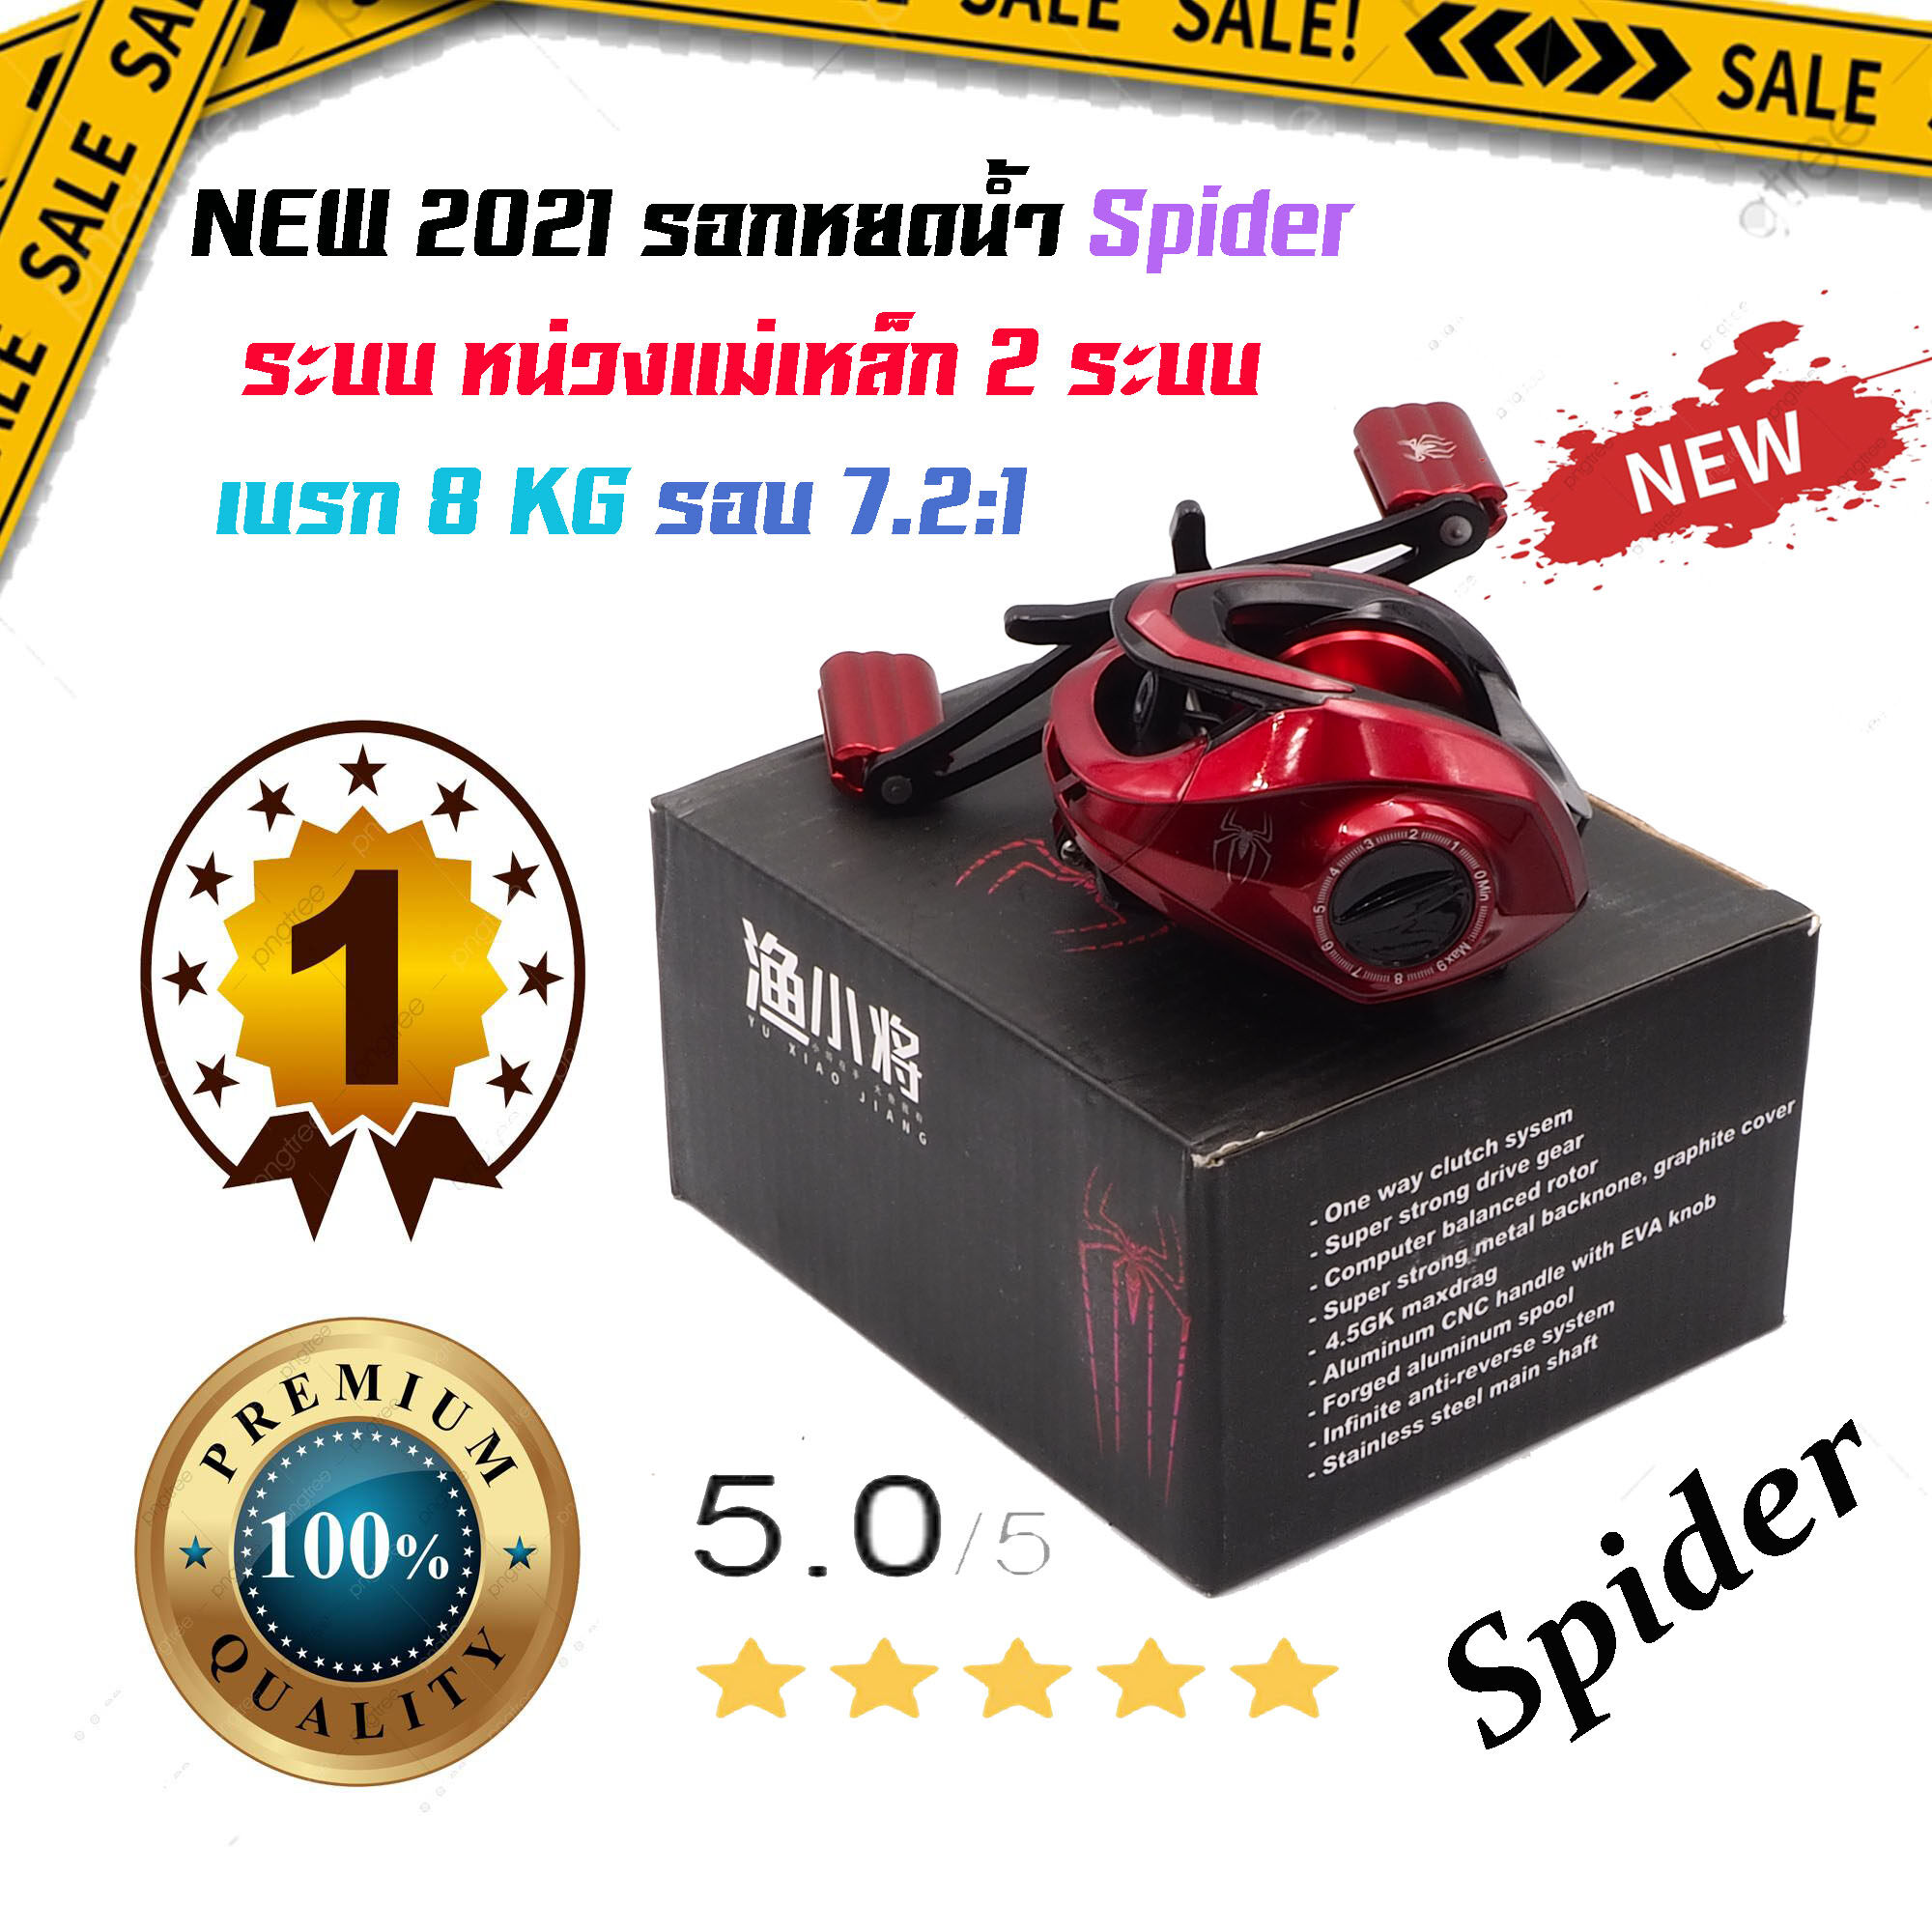 Free shipping!! 2021 water droplets reel sollen dripper dx91 Spider Red  magnetic damping two brake systems 8 kg around 7.2:1 (left-right rotation)